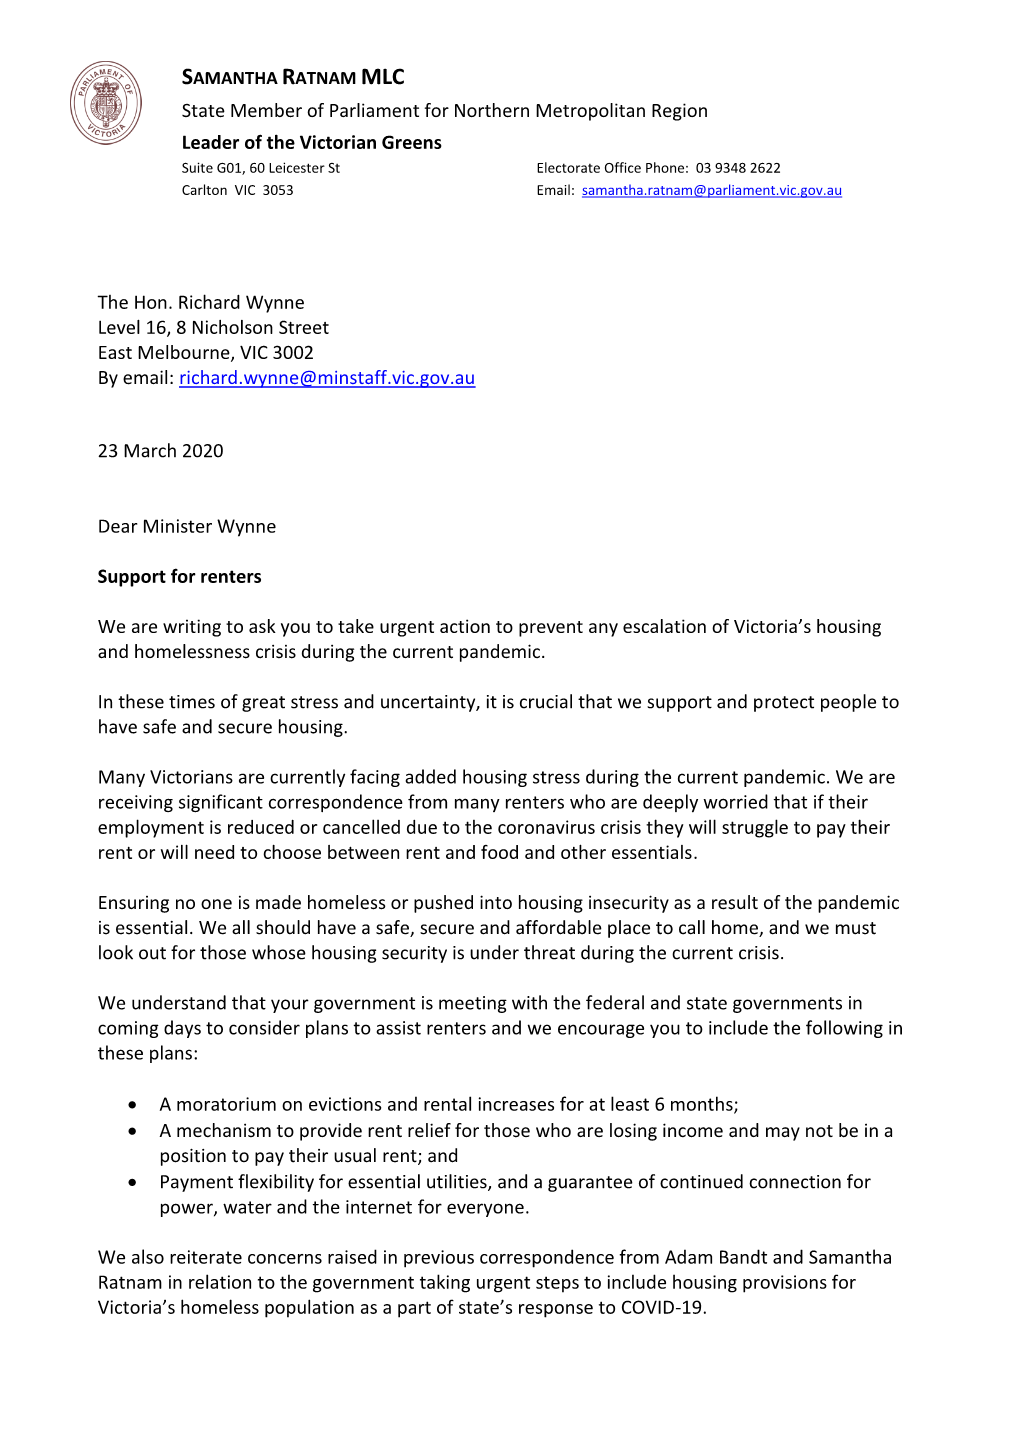 Victorian Greens Mps Letter to Ministers Wynne and Kairouz.Pdf